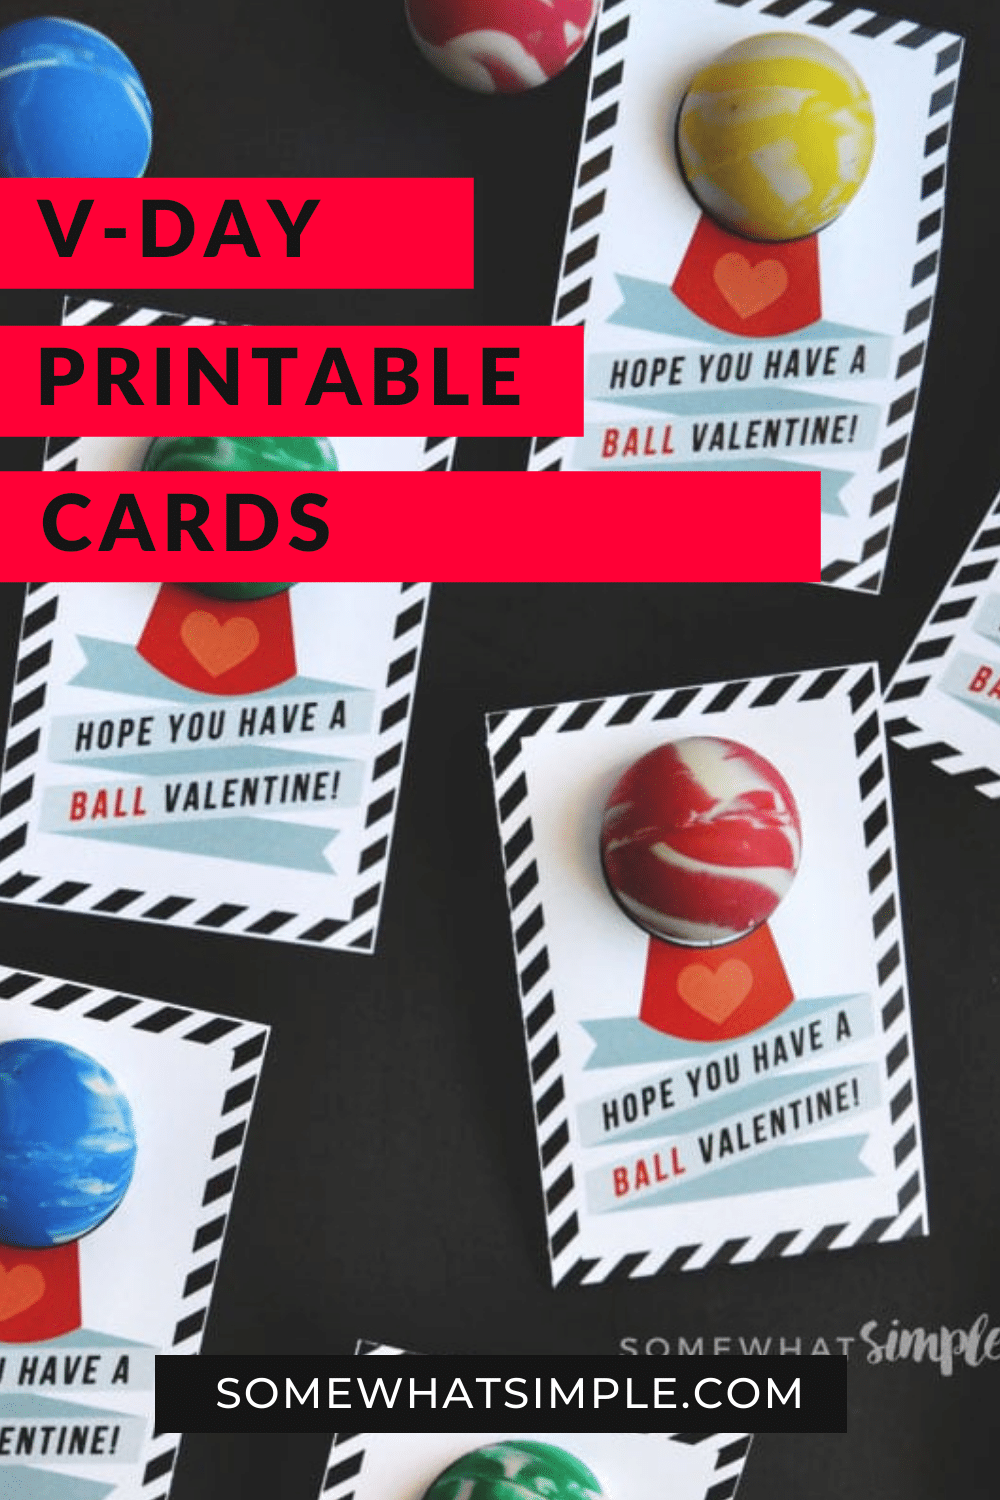 If simple, inexpensive, easy, and totally cute are on your checklist for school valentines this year, then start dancing, because these bouncy ball valentines meet all those requirements! They're perfect to throw together at the last minute too! via @somewhatsimple